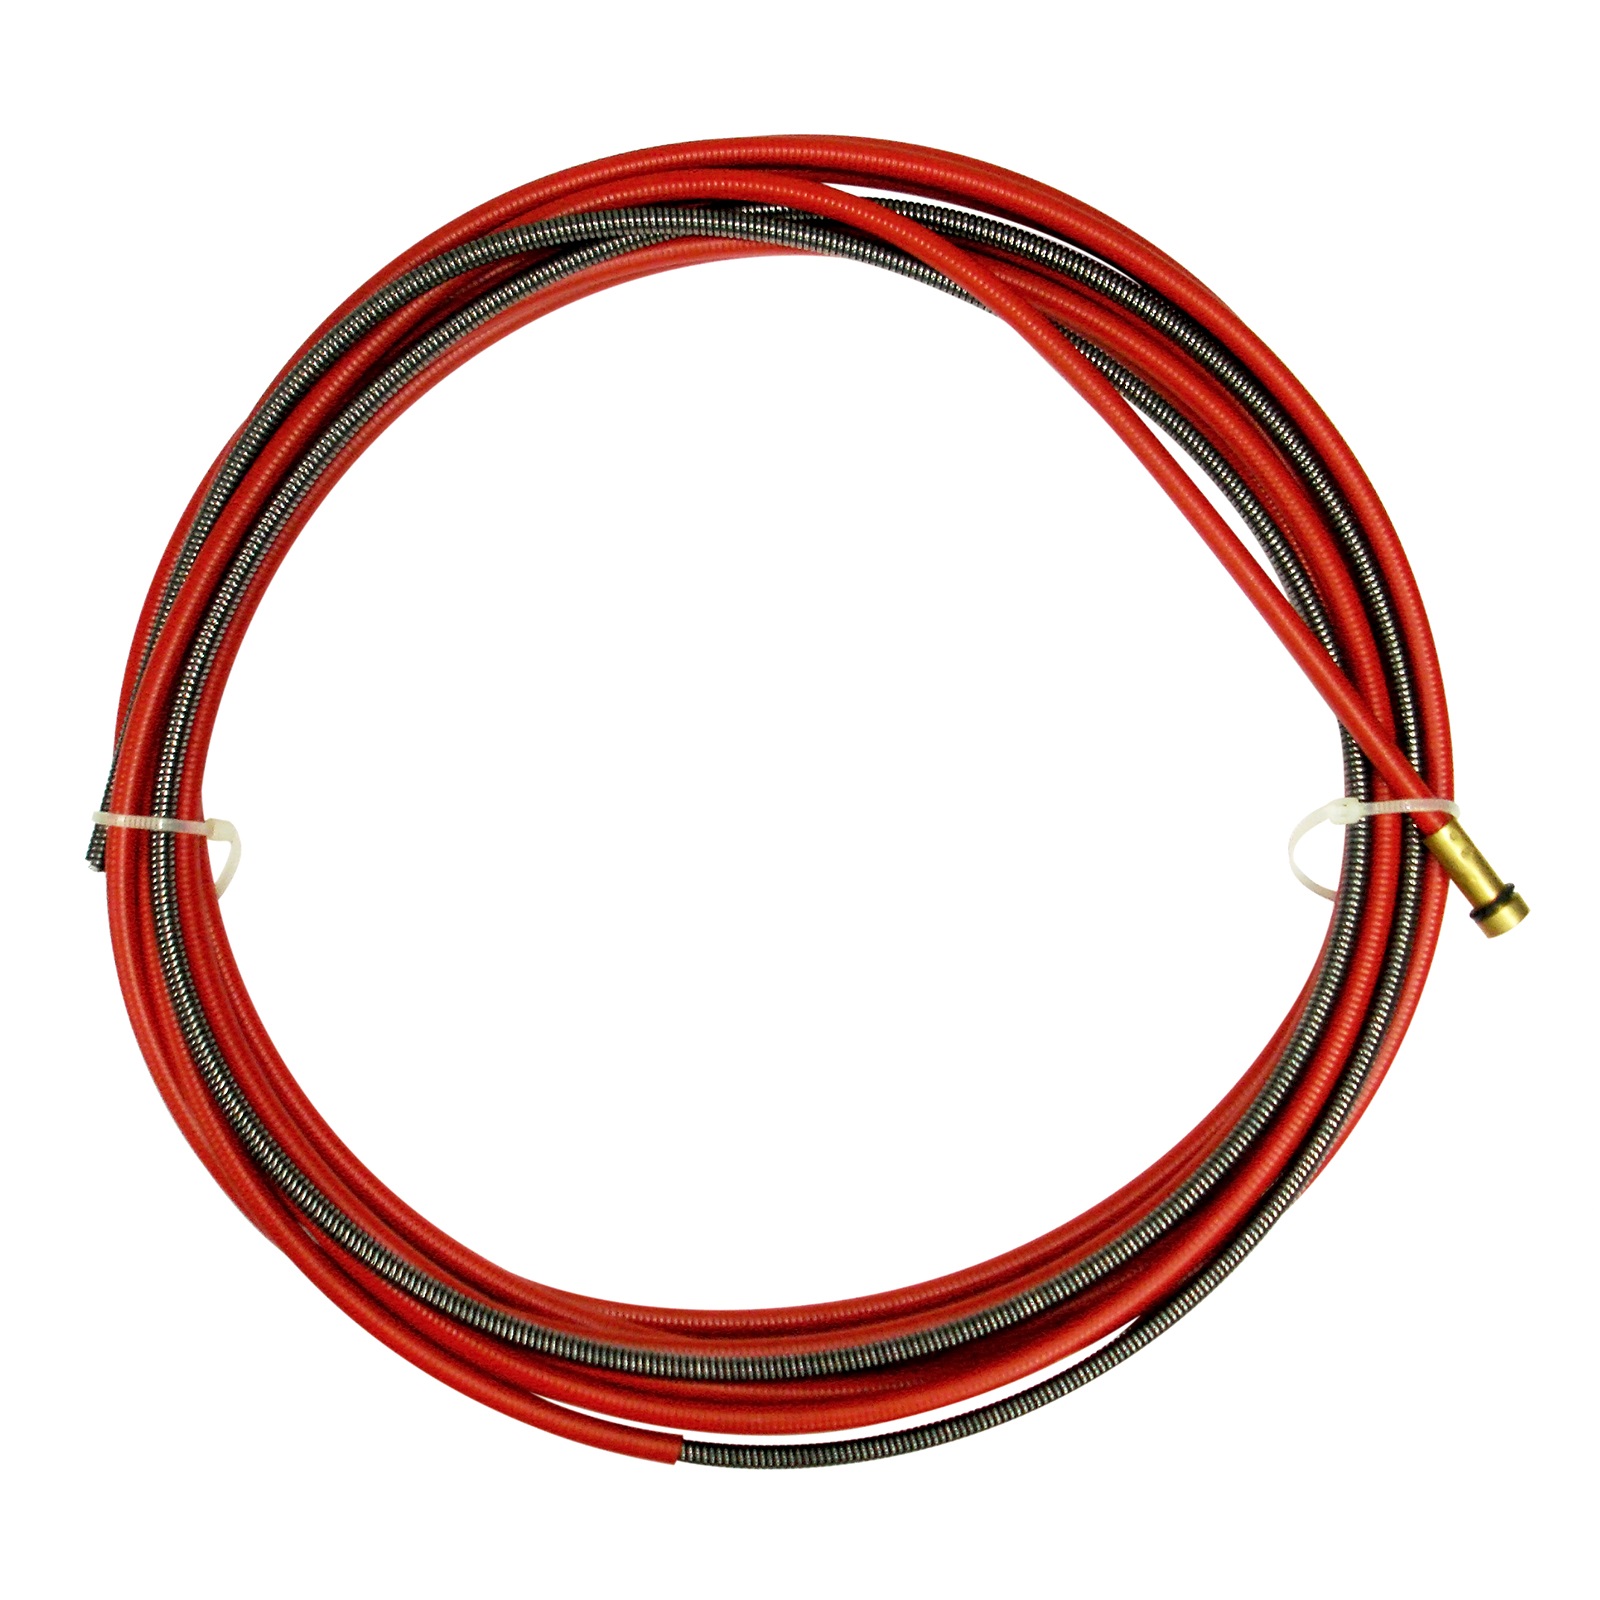 LINER PVC RED 1.0 - 1.2MM WIRE - 4.4M